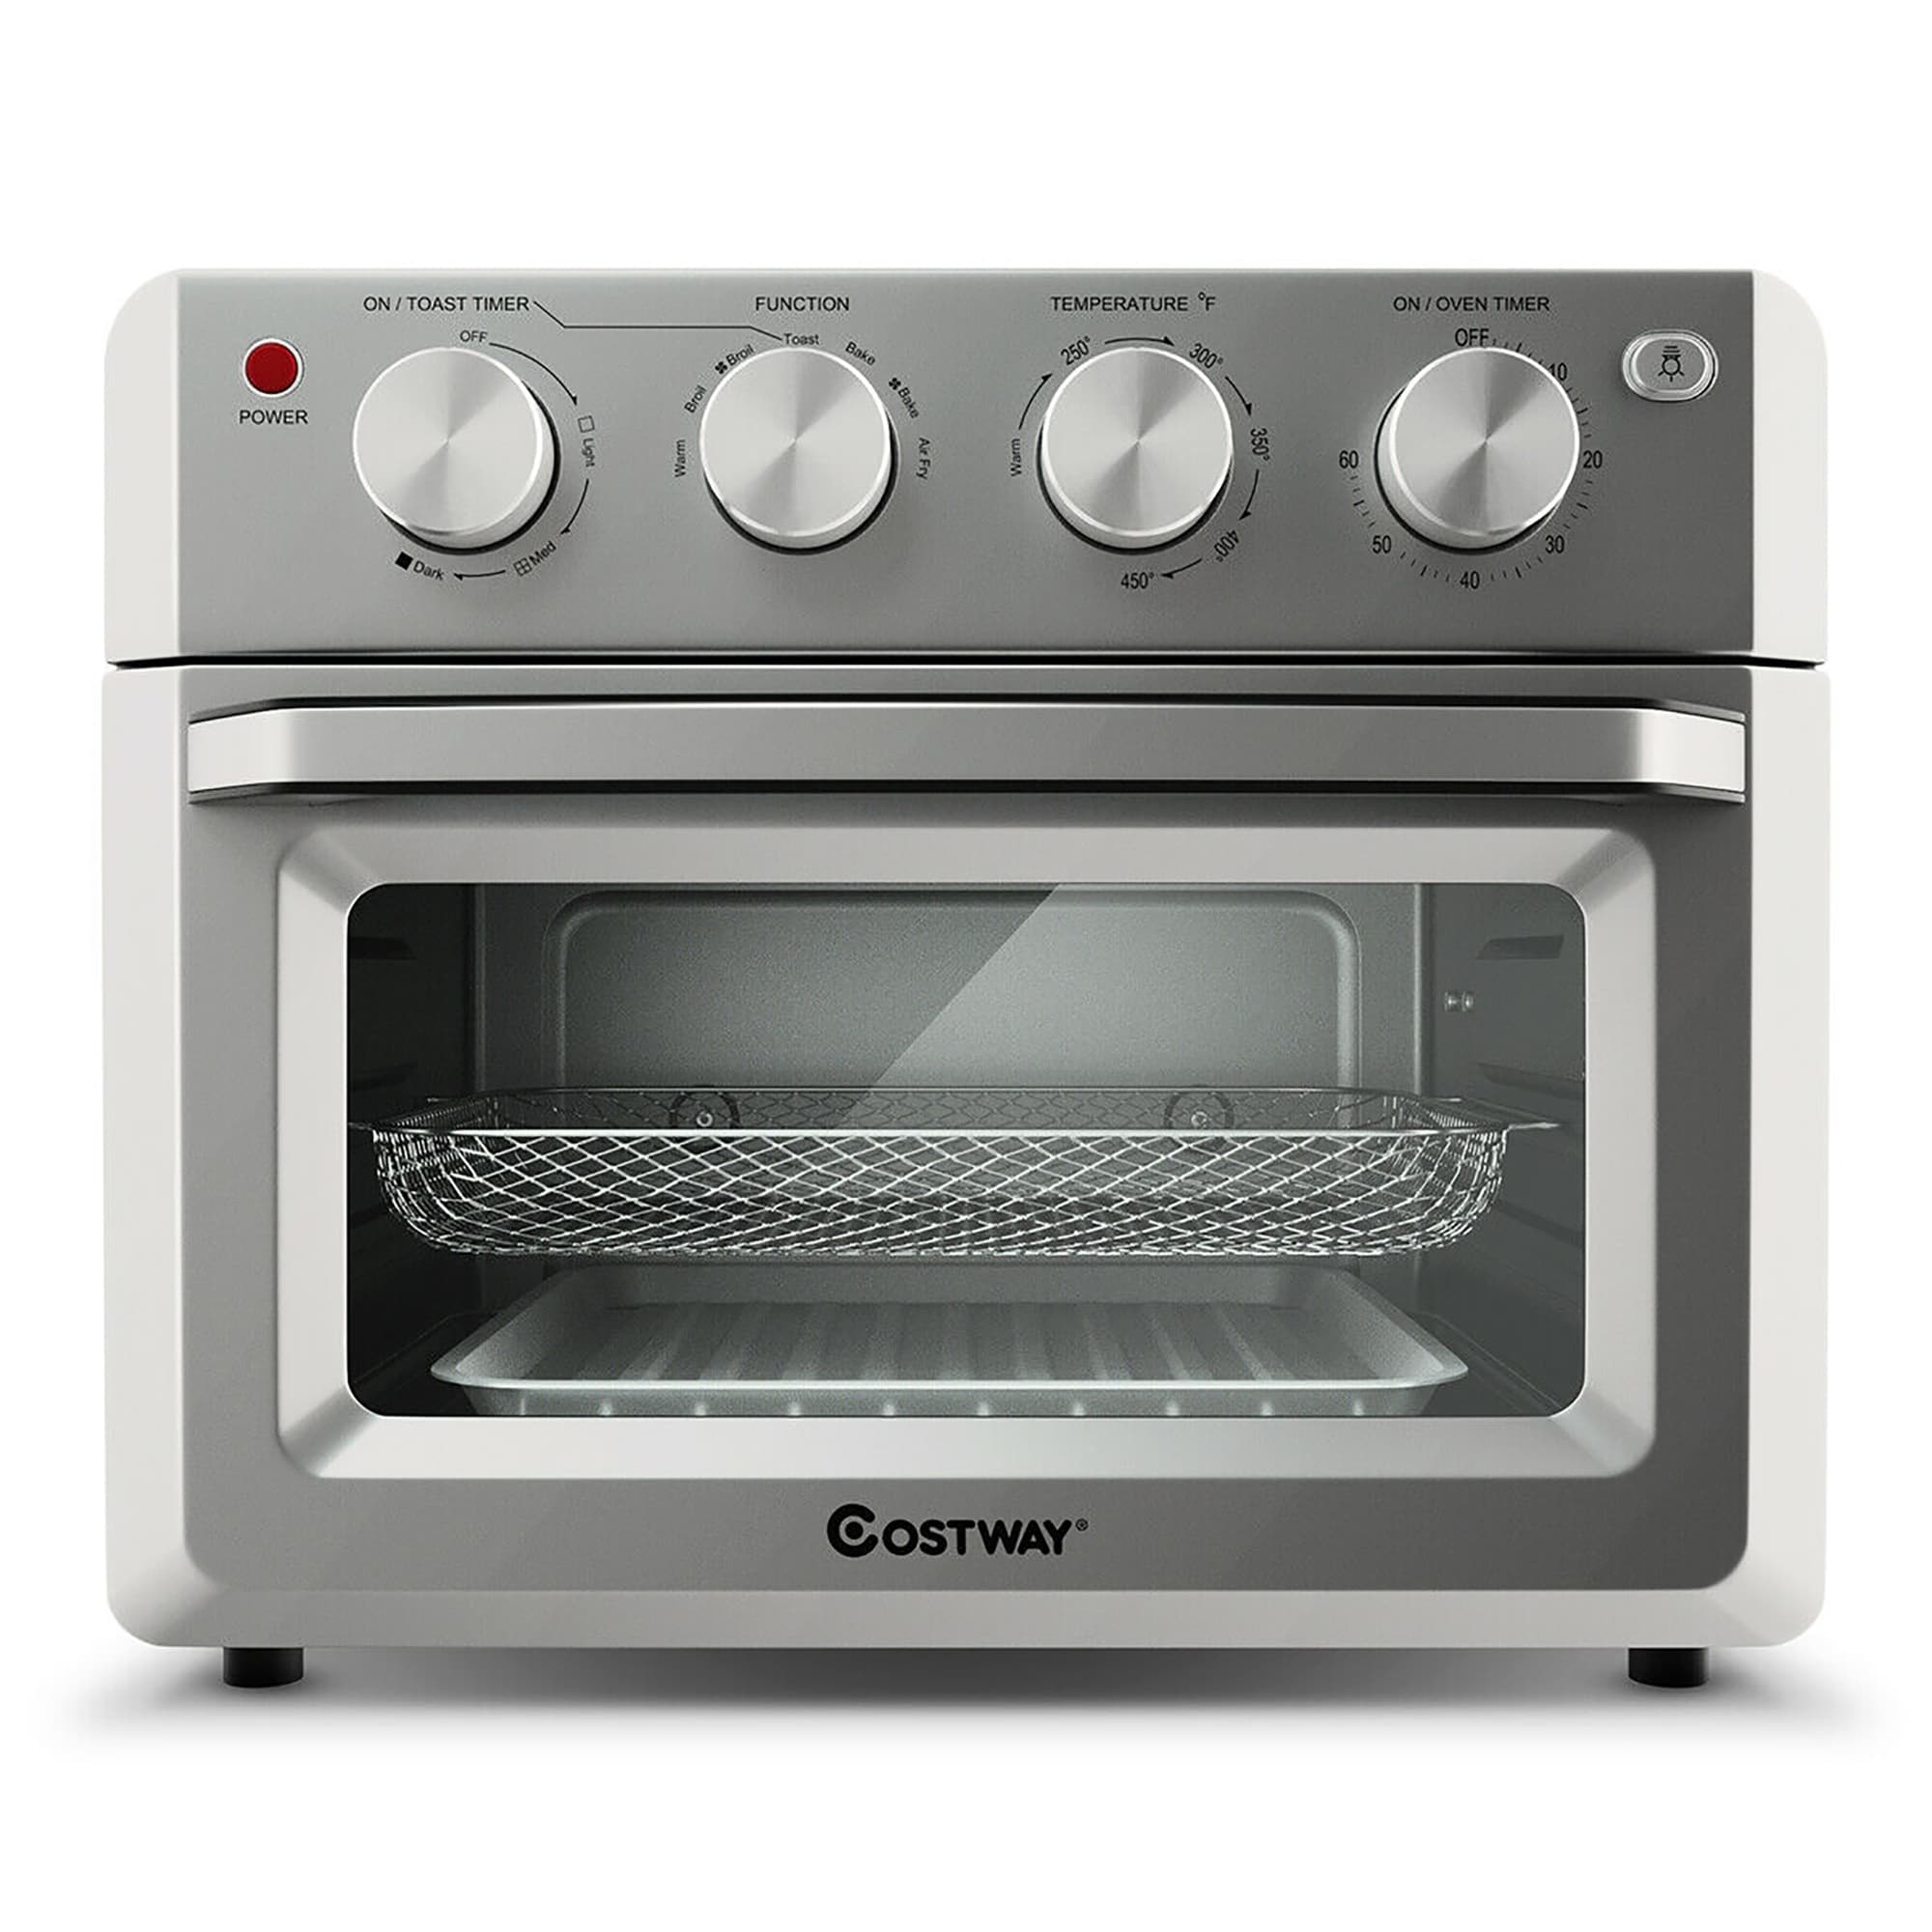 Compact Air Fryer Toaster Oven (Stainless Steel), Cuisinart